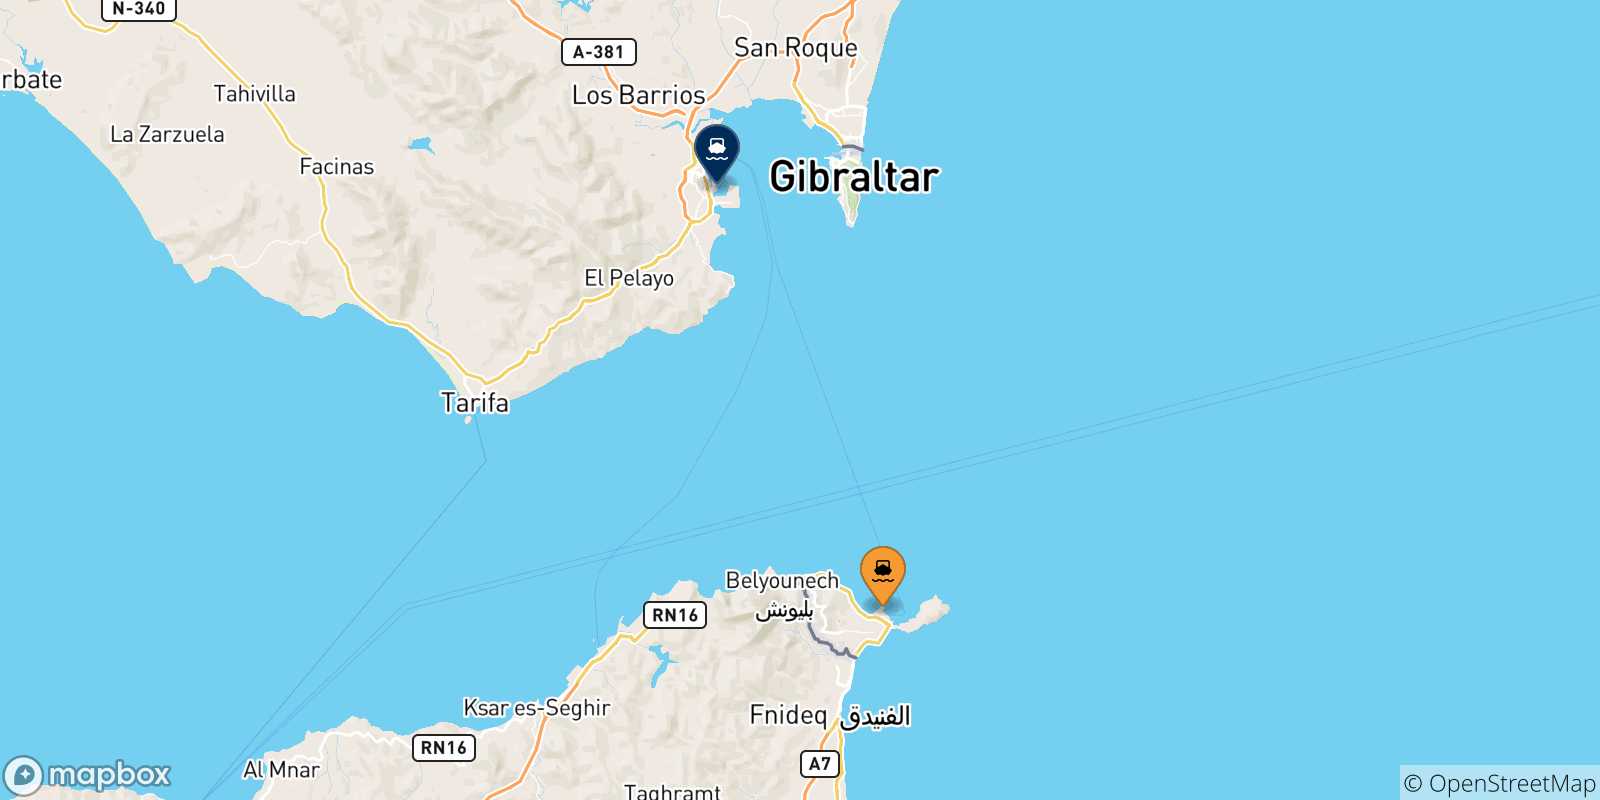 Map of the possible routes between Spain and Algeciras